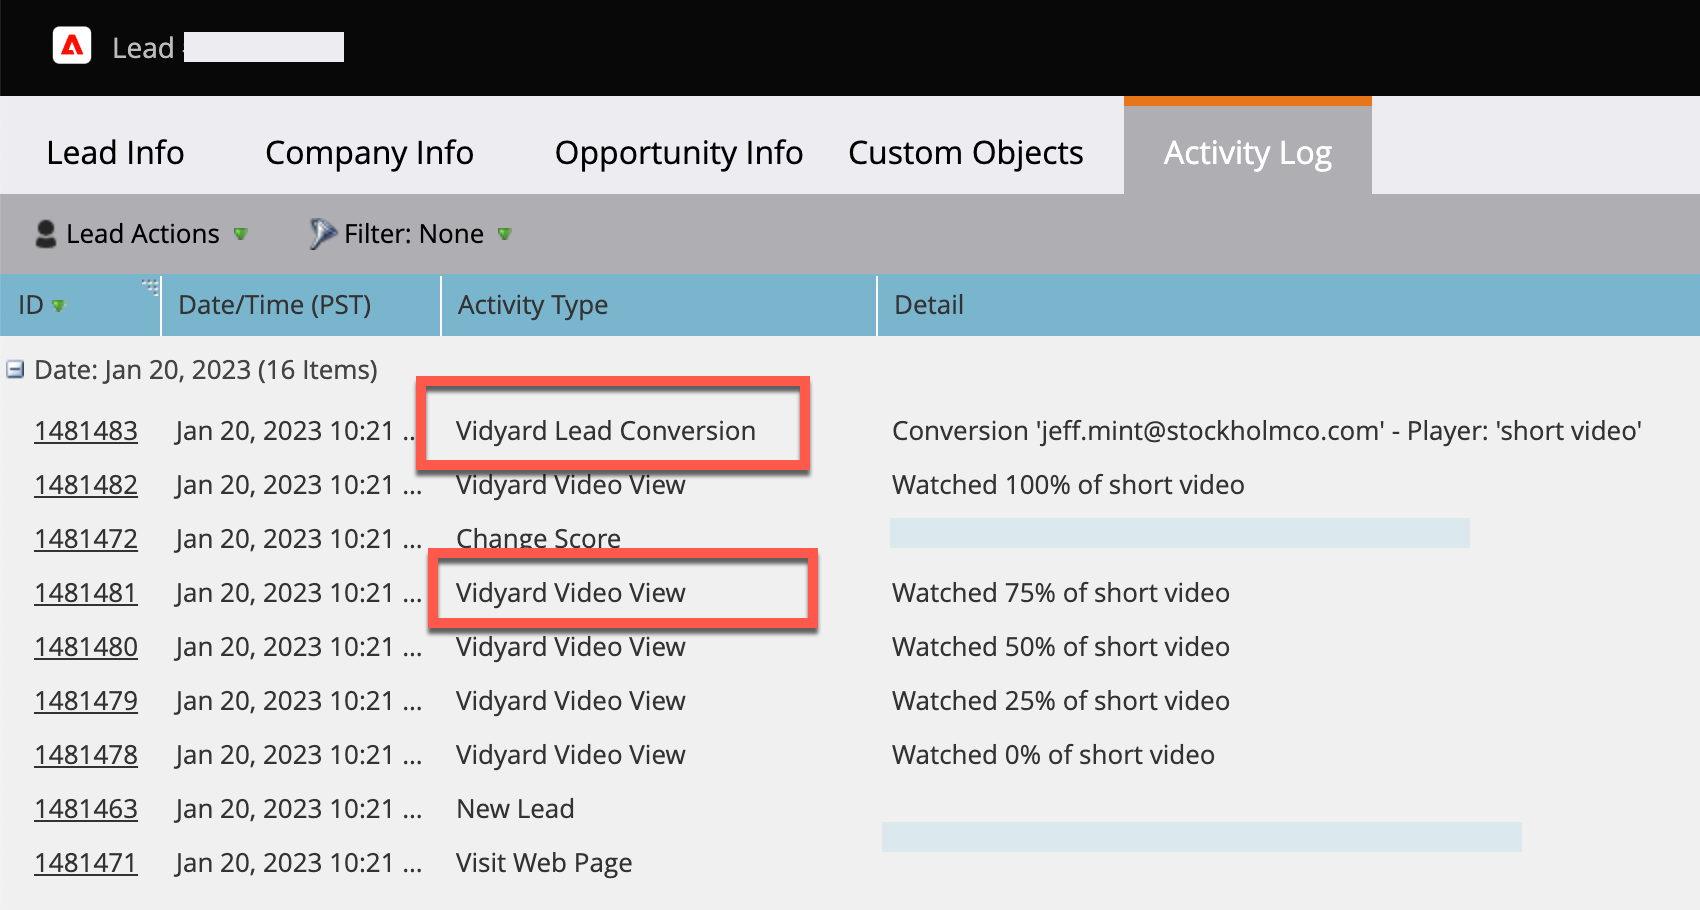 A lead's activity log in Marketo, demonstrating a Vidyard Video View and Vidyard Lead Converstion activity